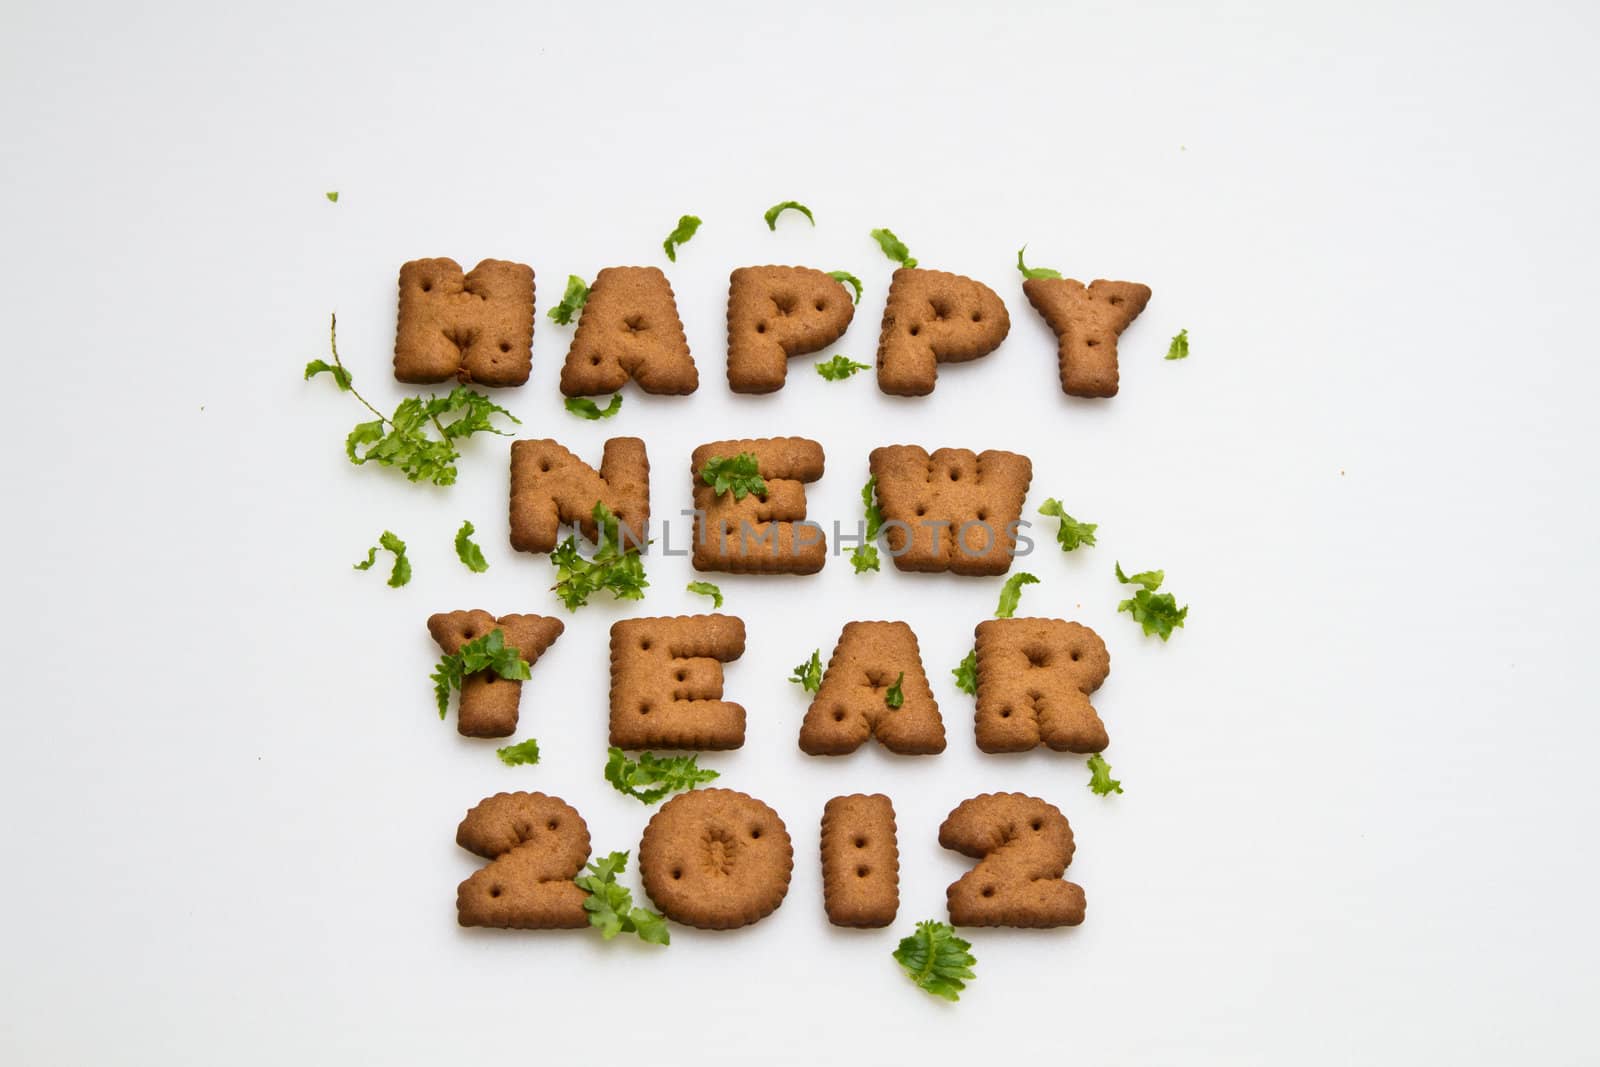 Happy New Year 2012 greeting words made by brown biscuits with green leaves on white surface in landscape orientation for background use